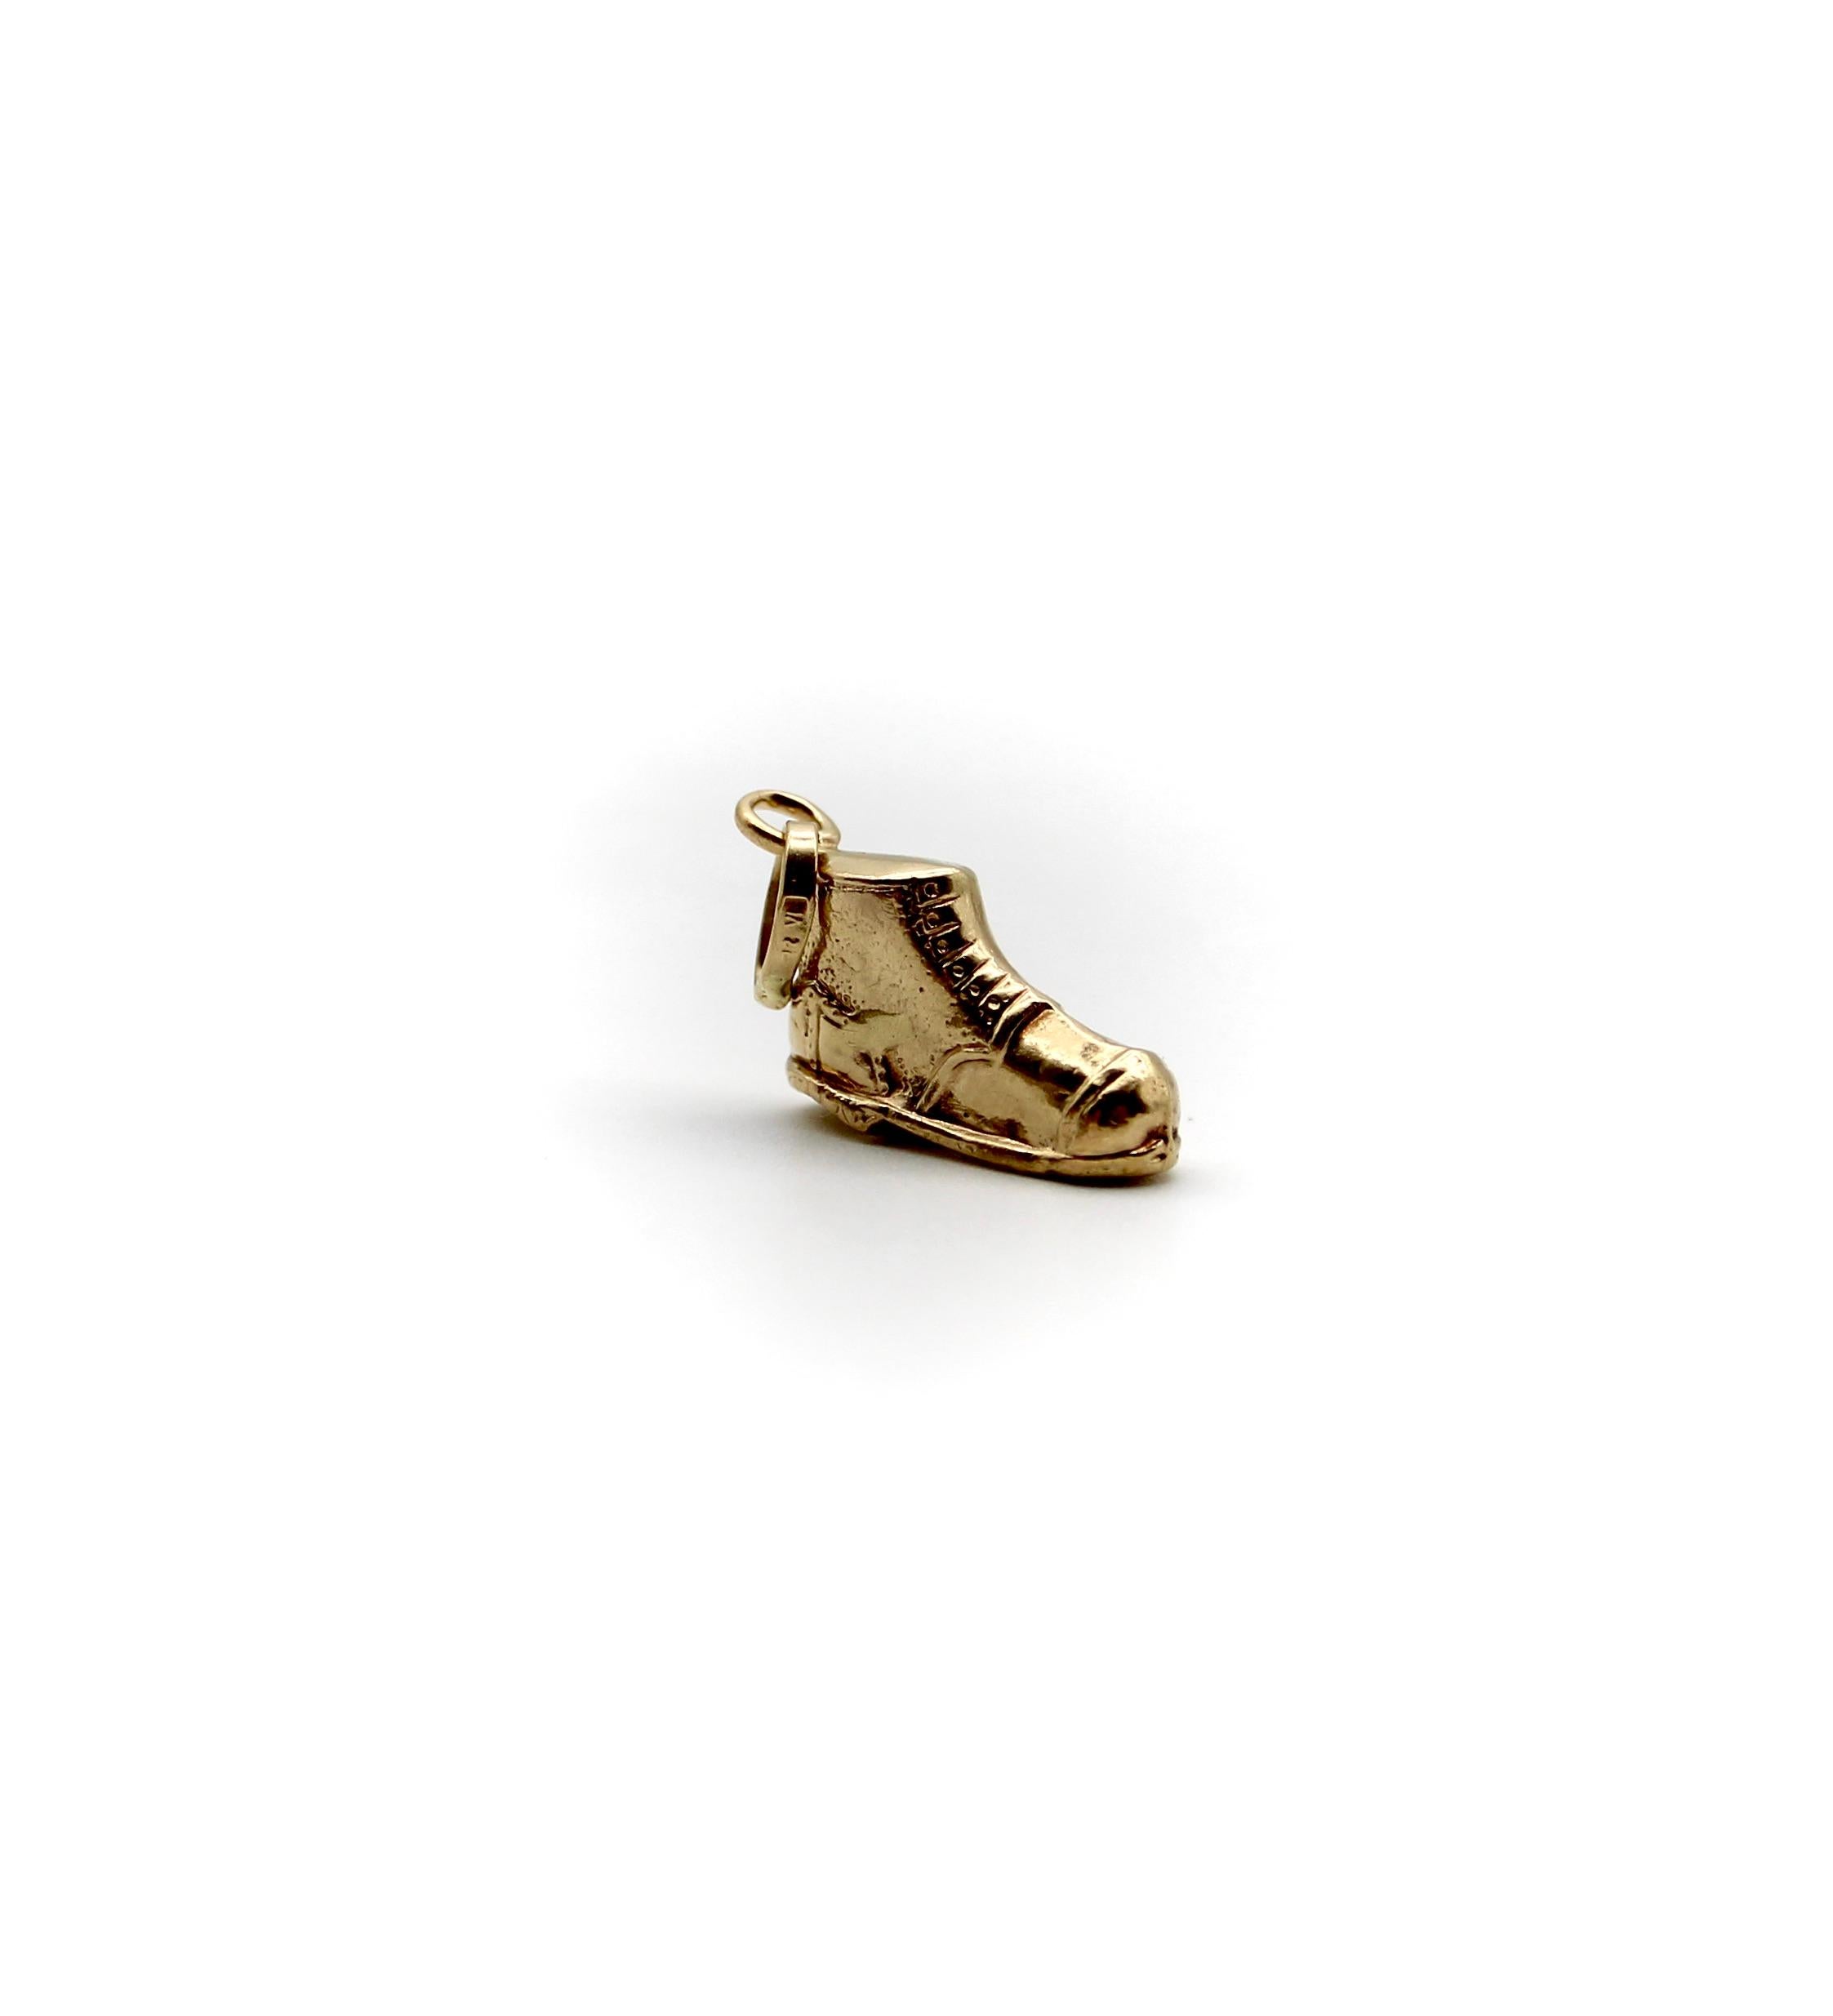  An adorable 18k gold boot charm, with all the details of a vintage leather shoe. The charm is 1/4” x 3/8” and weighs 1.02 grams. It hangs from a 4 x 6 mm bail. 

The tiny, intricate details of the boot give this charm a lot of character and a